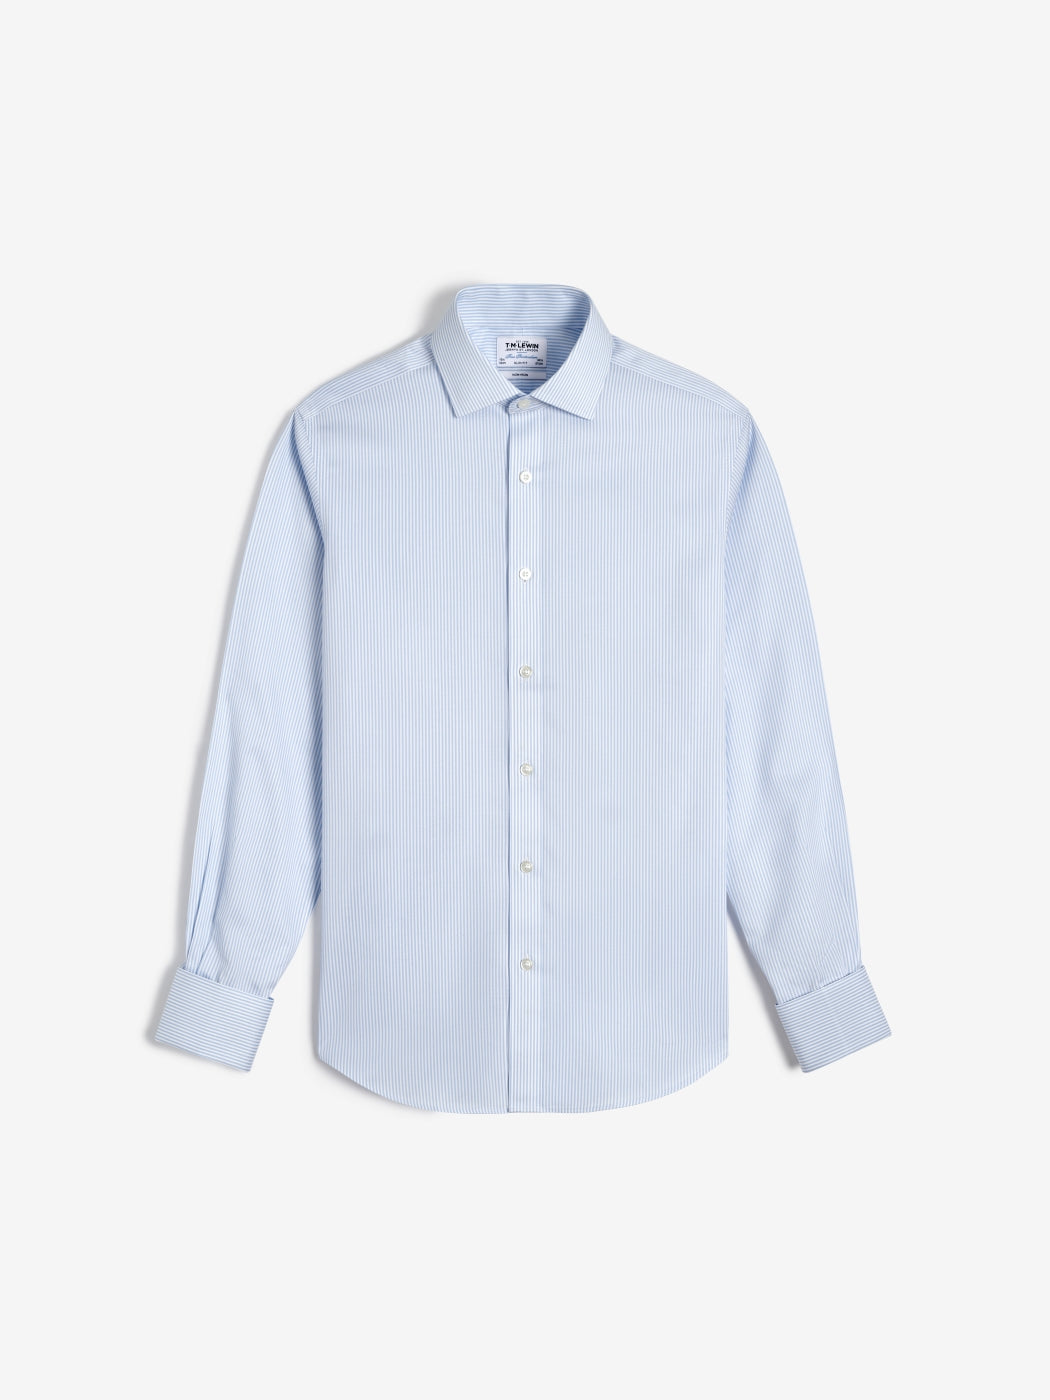 Image 2 of Non-Iron Light Blue Bengal Stripe Twill Fitted Double Cuff Classic Collar Shirt